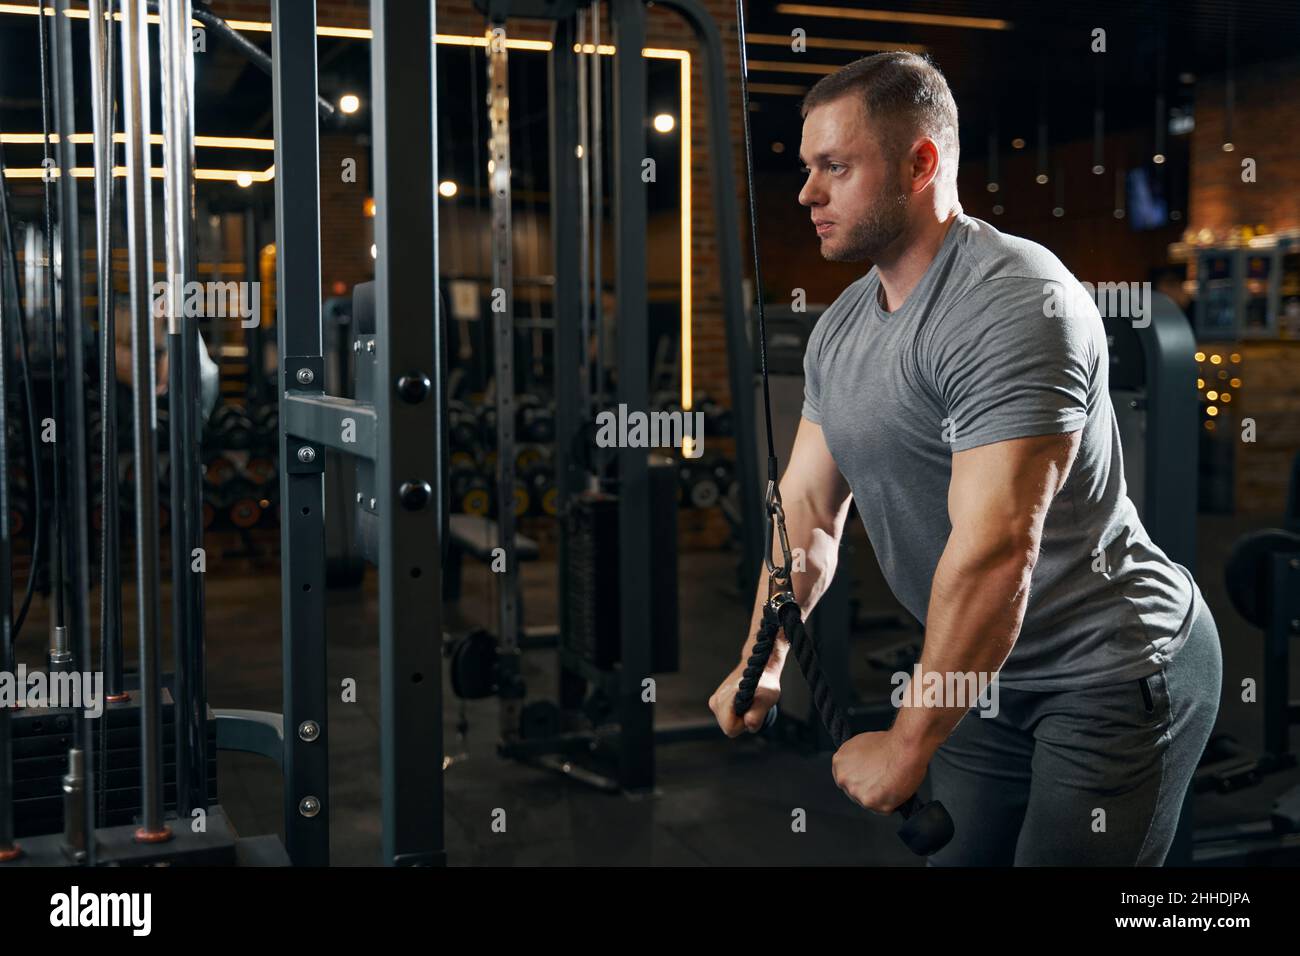 Focused athlete working out on cable machine Stock Photo